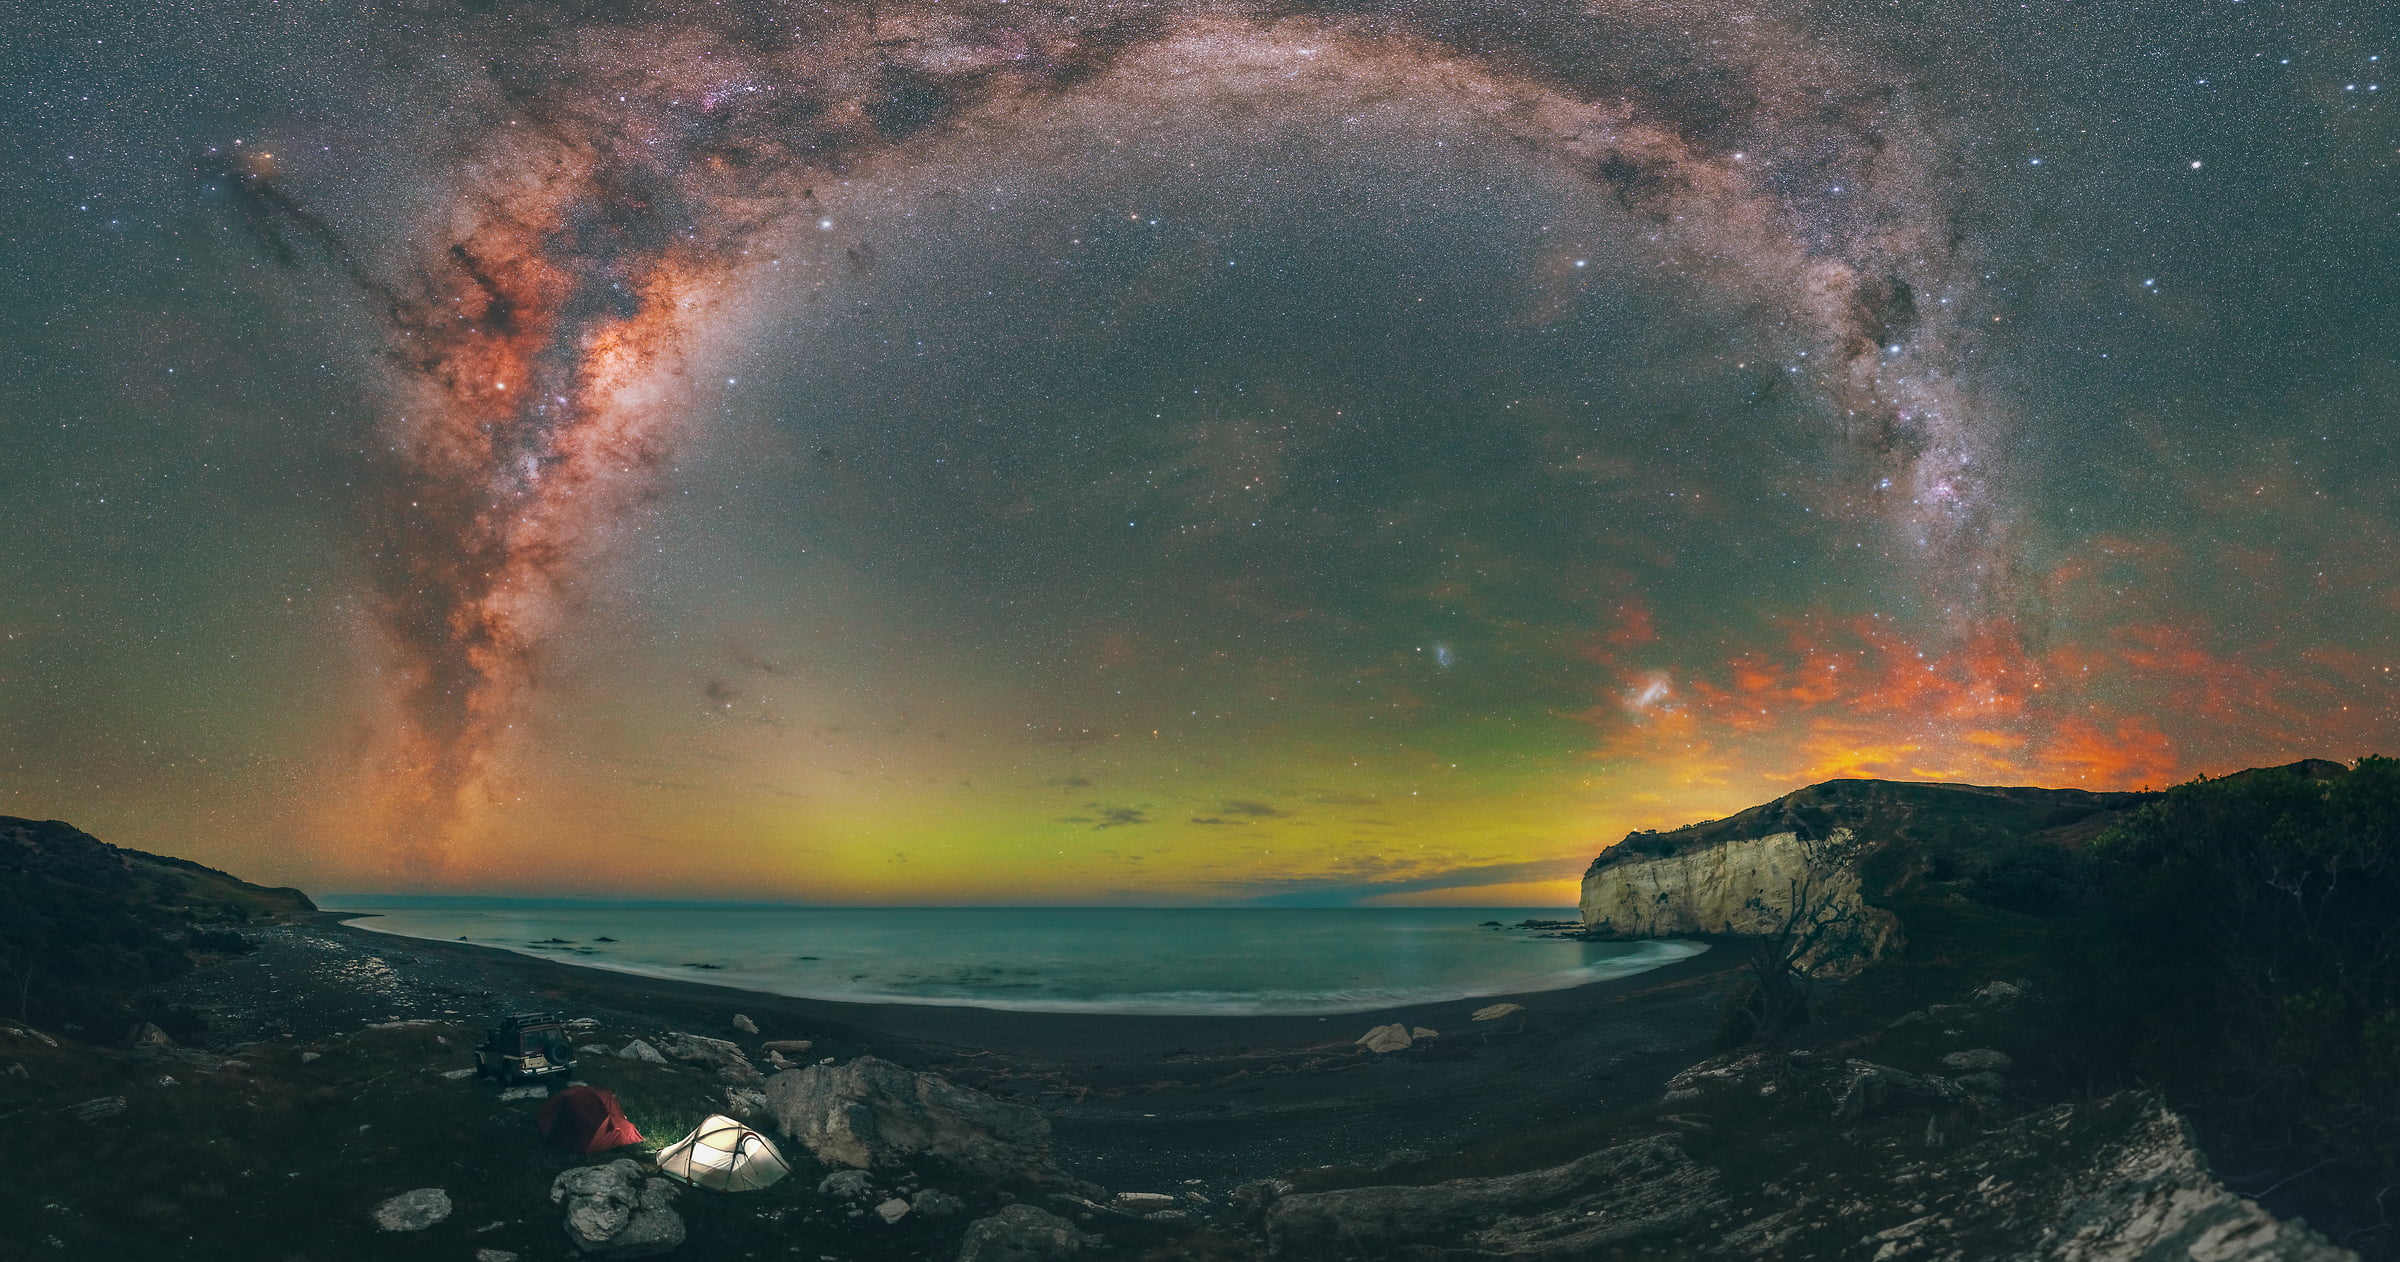 691 megapixels! A very high resolution, large-format VAST photo print of the night sky, milky way, and stars over an ocean beach with tents and camping equipment; fine art astrophotography landscape photo created by Paul Wilson in New Zealand